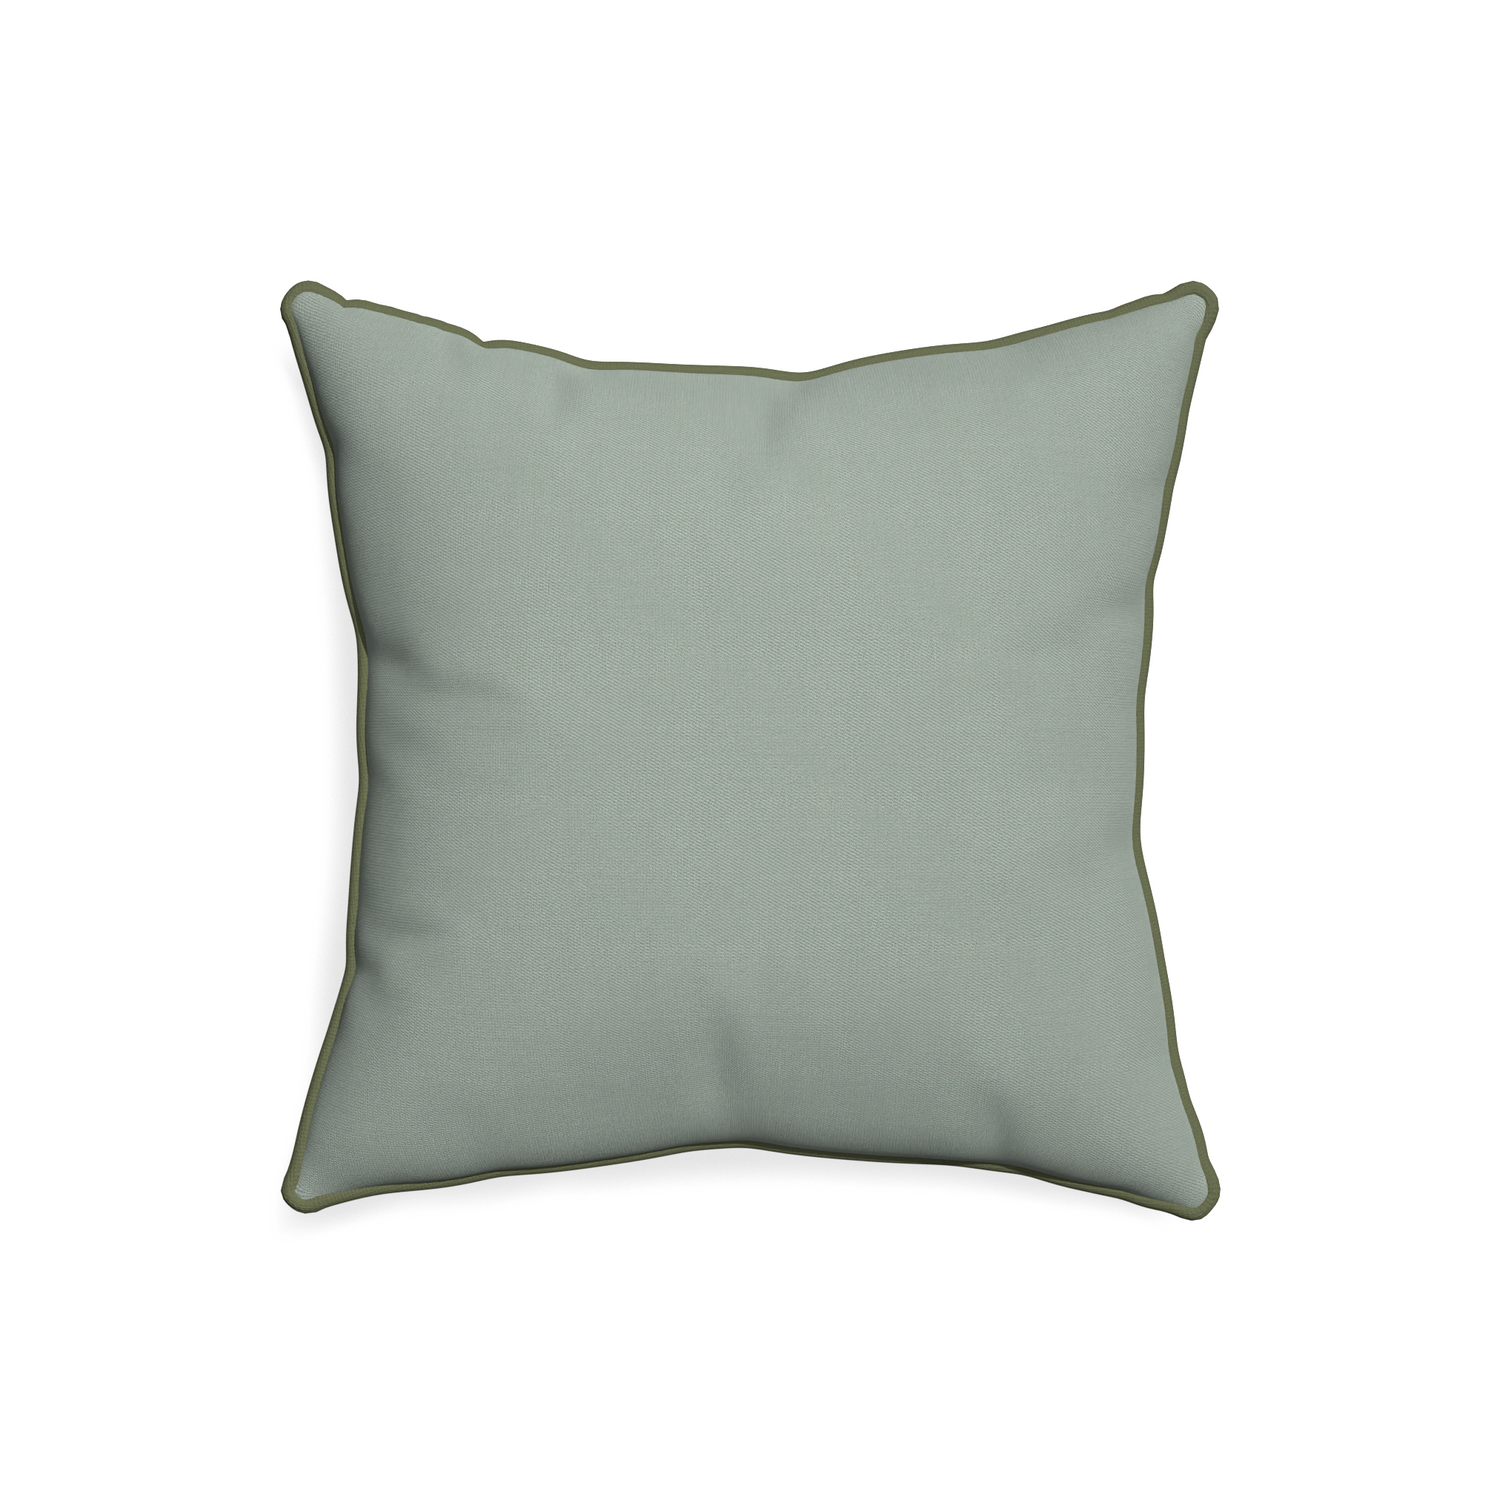 20-square sage custom pillow with f piping on white background